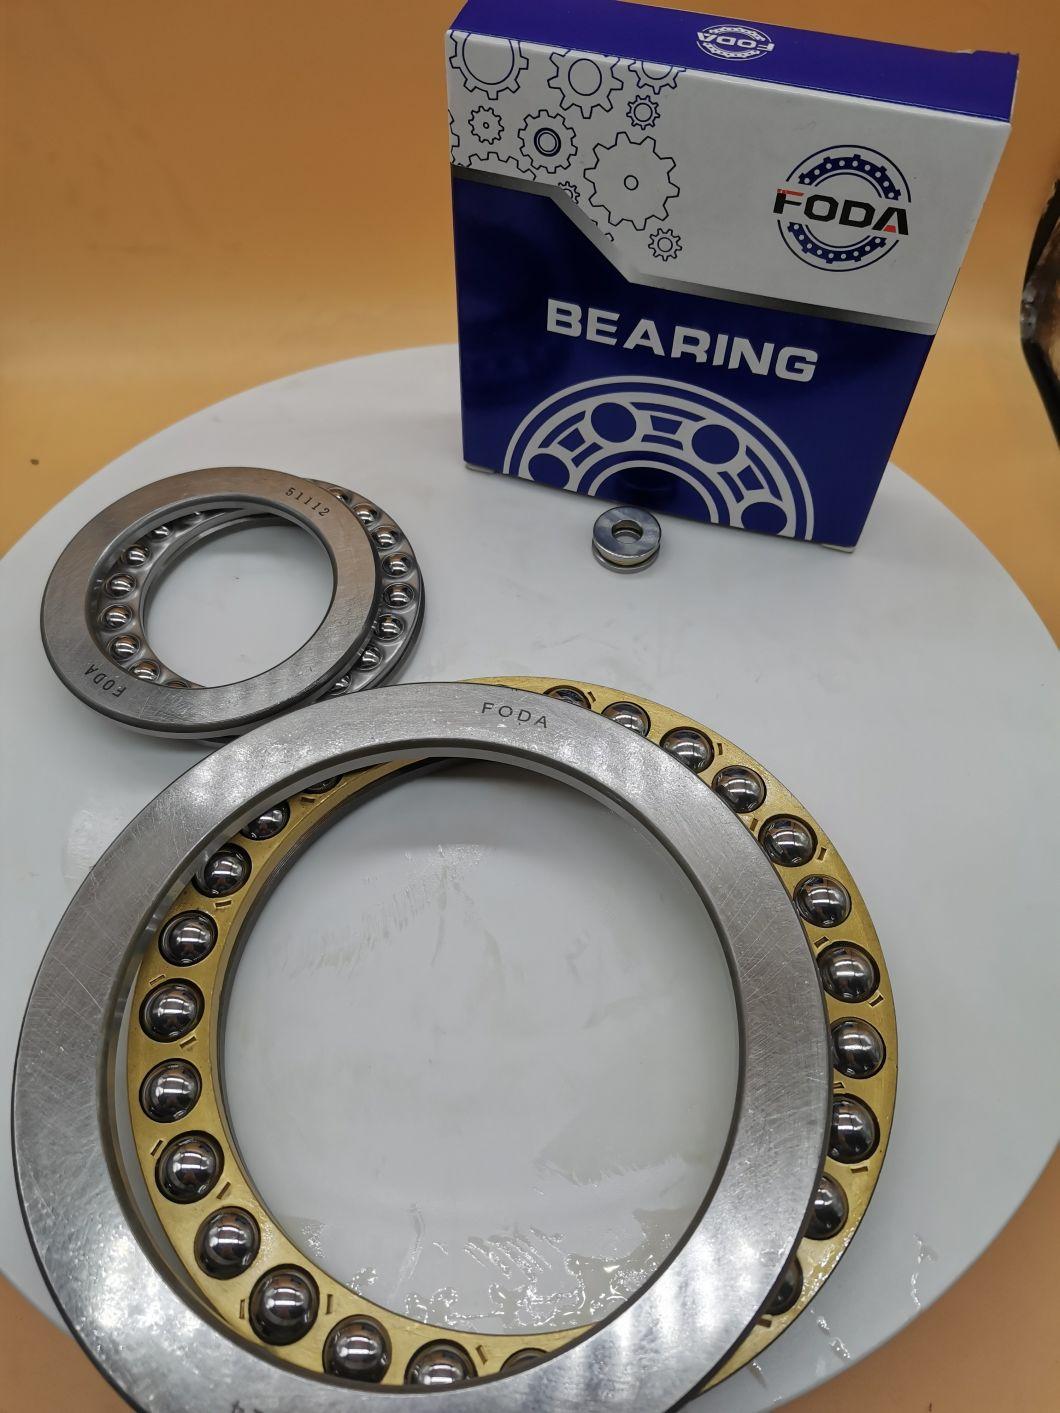 Unidirectional Thrust Ball Bearings/Low Speed Reducer/Foda High Quality Bearings Instead of Koyo Bearings/Thrust Ball Bearings of 51406